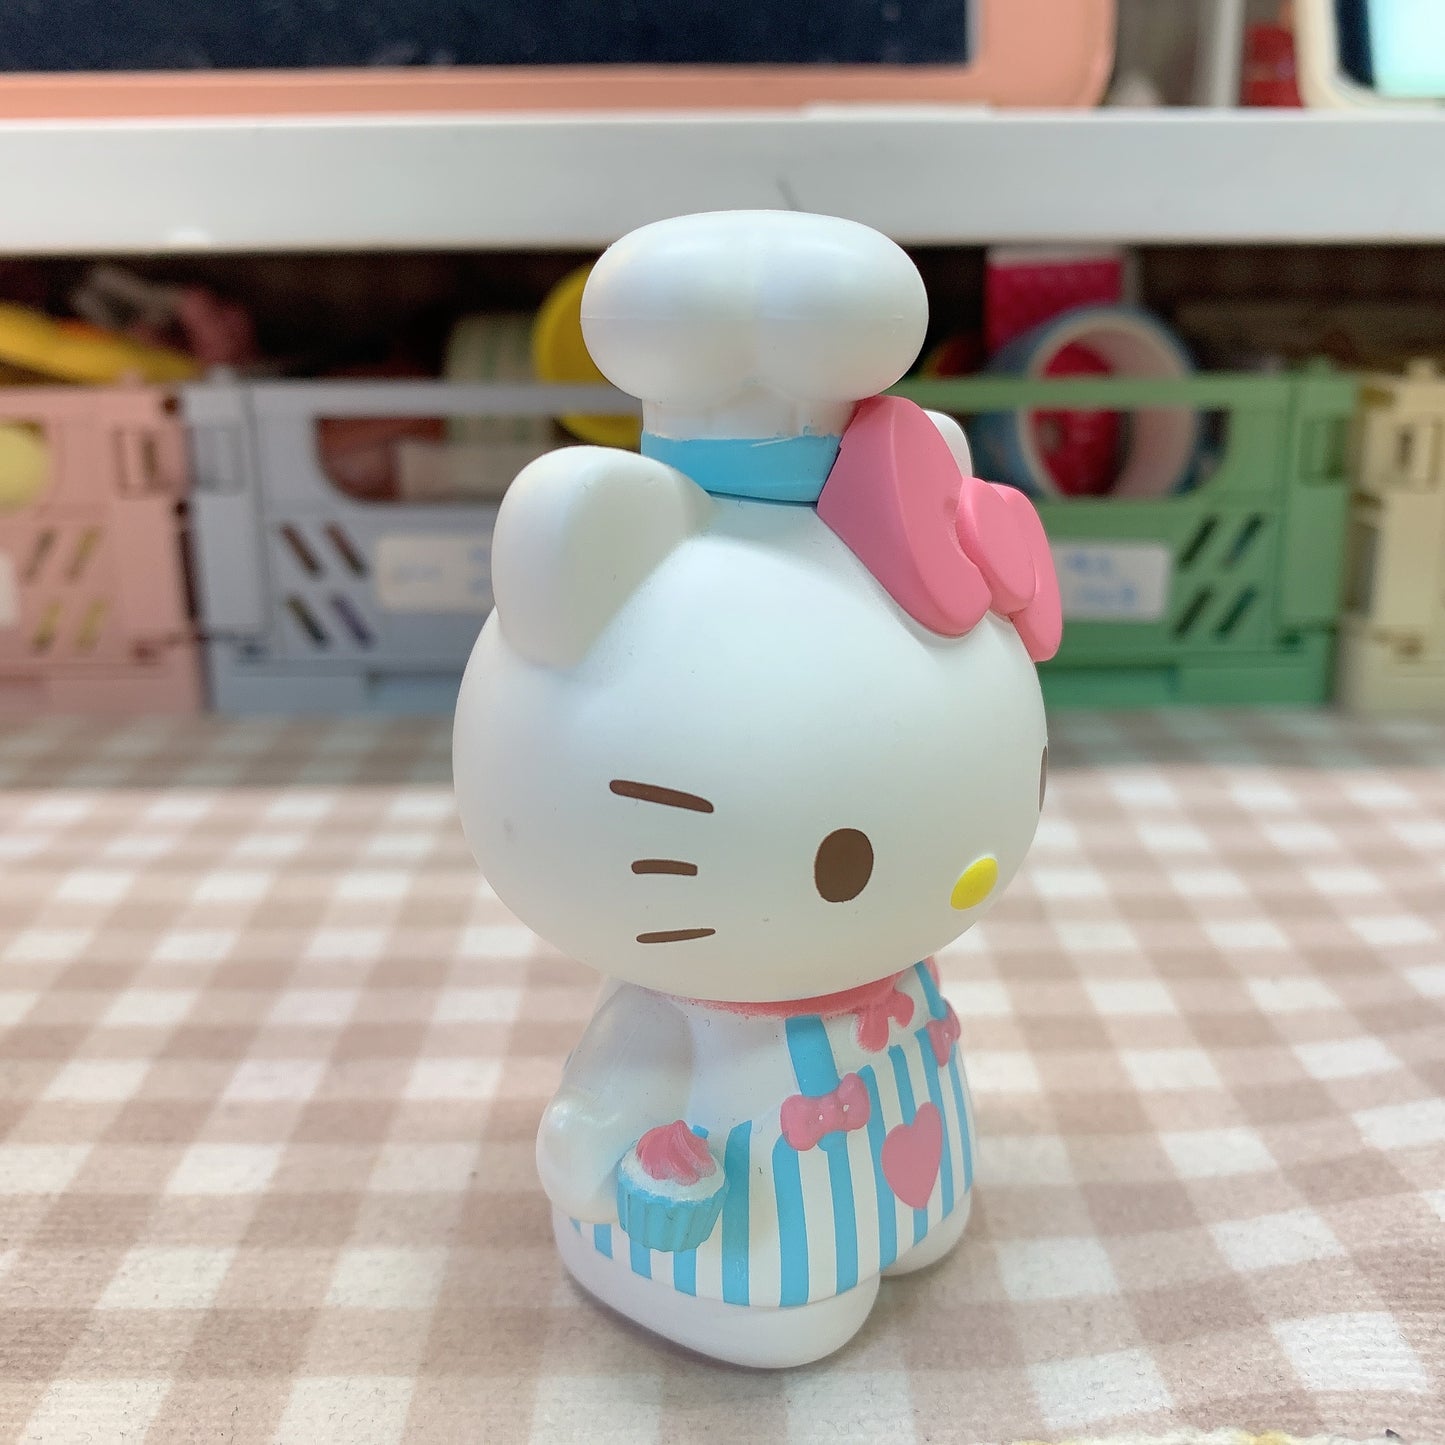 【PRELOVED and SALE 】POPMART × Sanrio Hello Kitty Career series blind box toy pastry cook